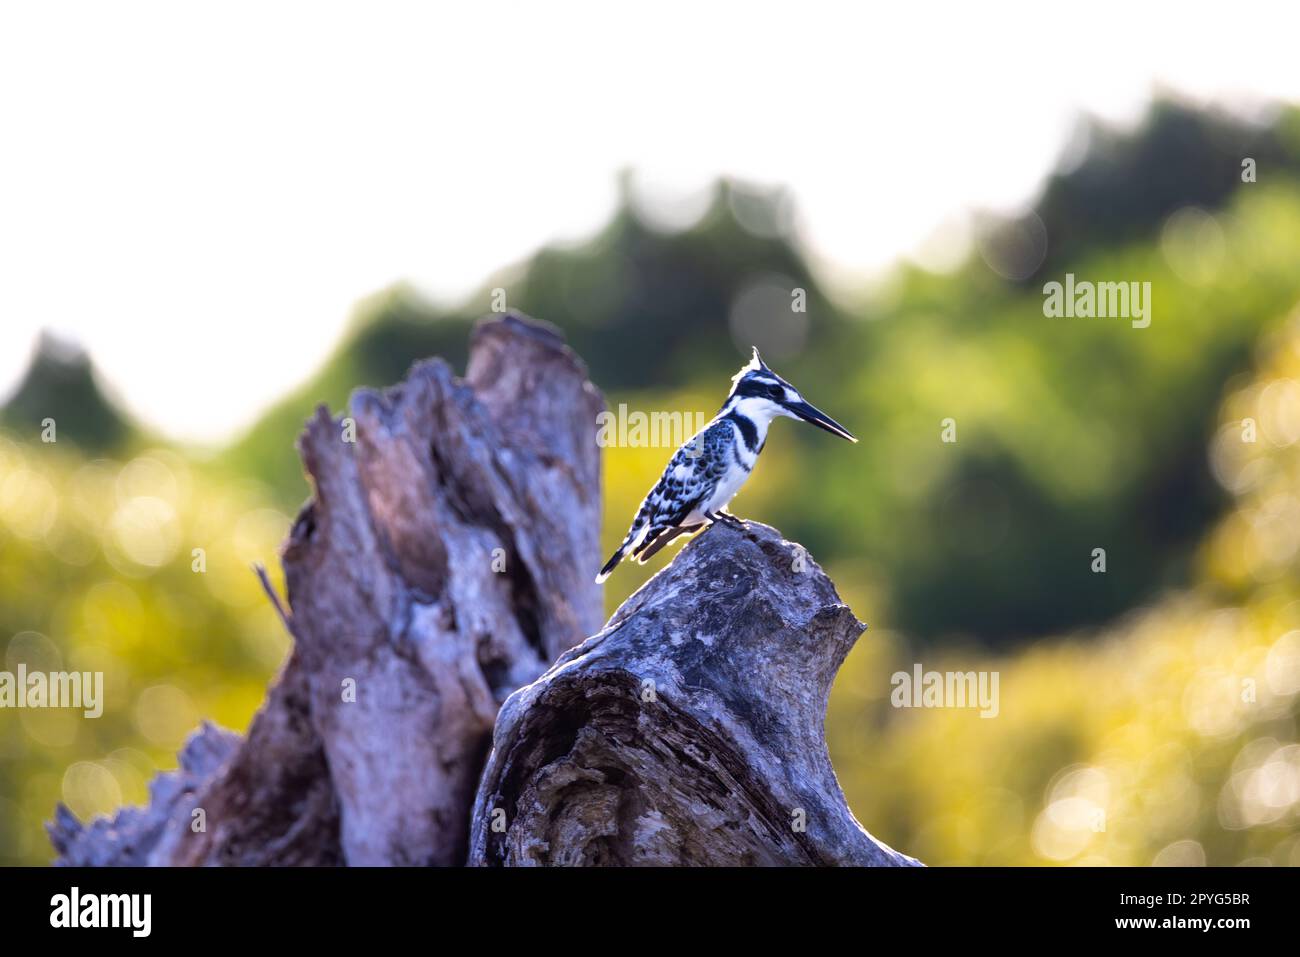 A beautiful black and white pied kingfisher bird sits on a weathered tree trunk, surveying the waters below, in Kenya Stock Photo